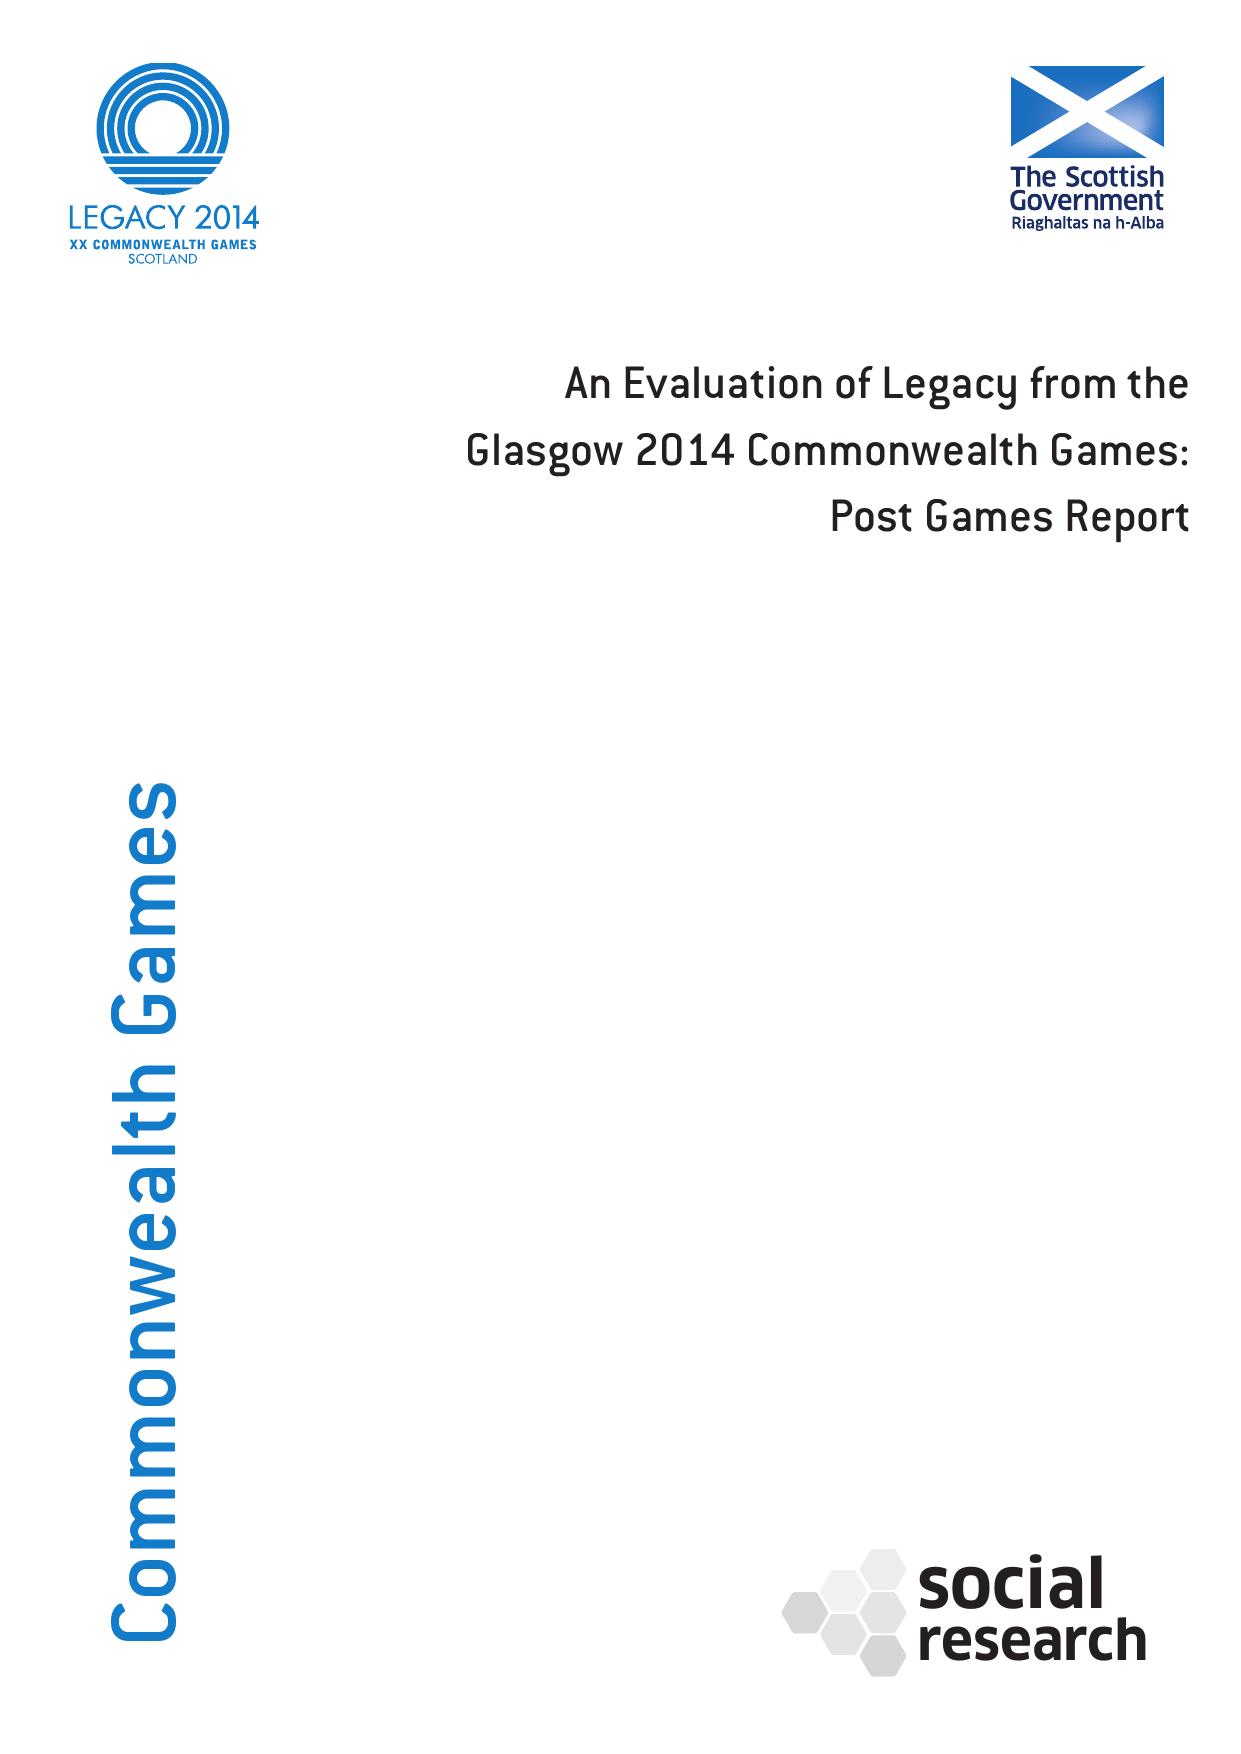 Commonwealth Games An Evaluation of Legacy from the Glasgow 2014 Commonwealth Games: Post Games Report